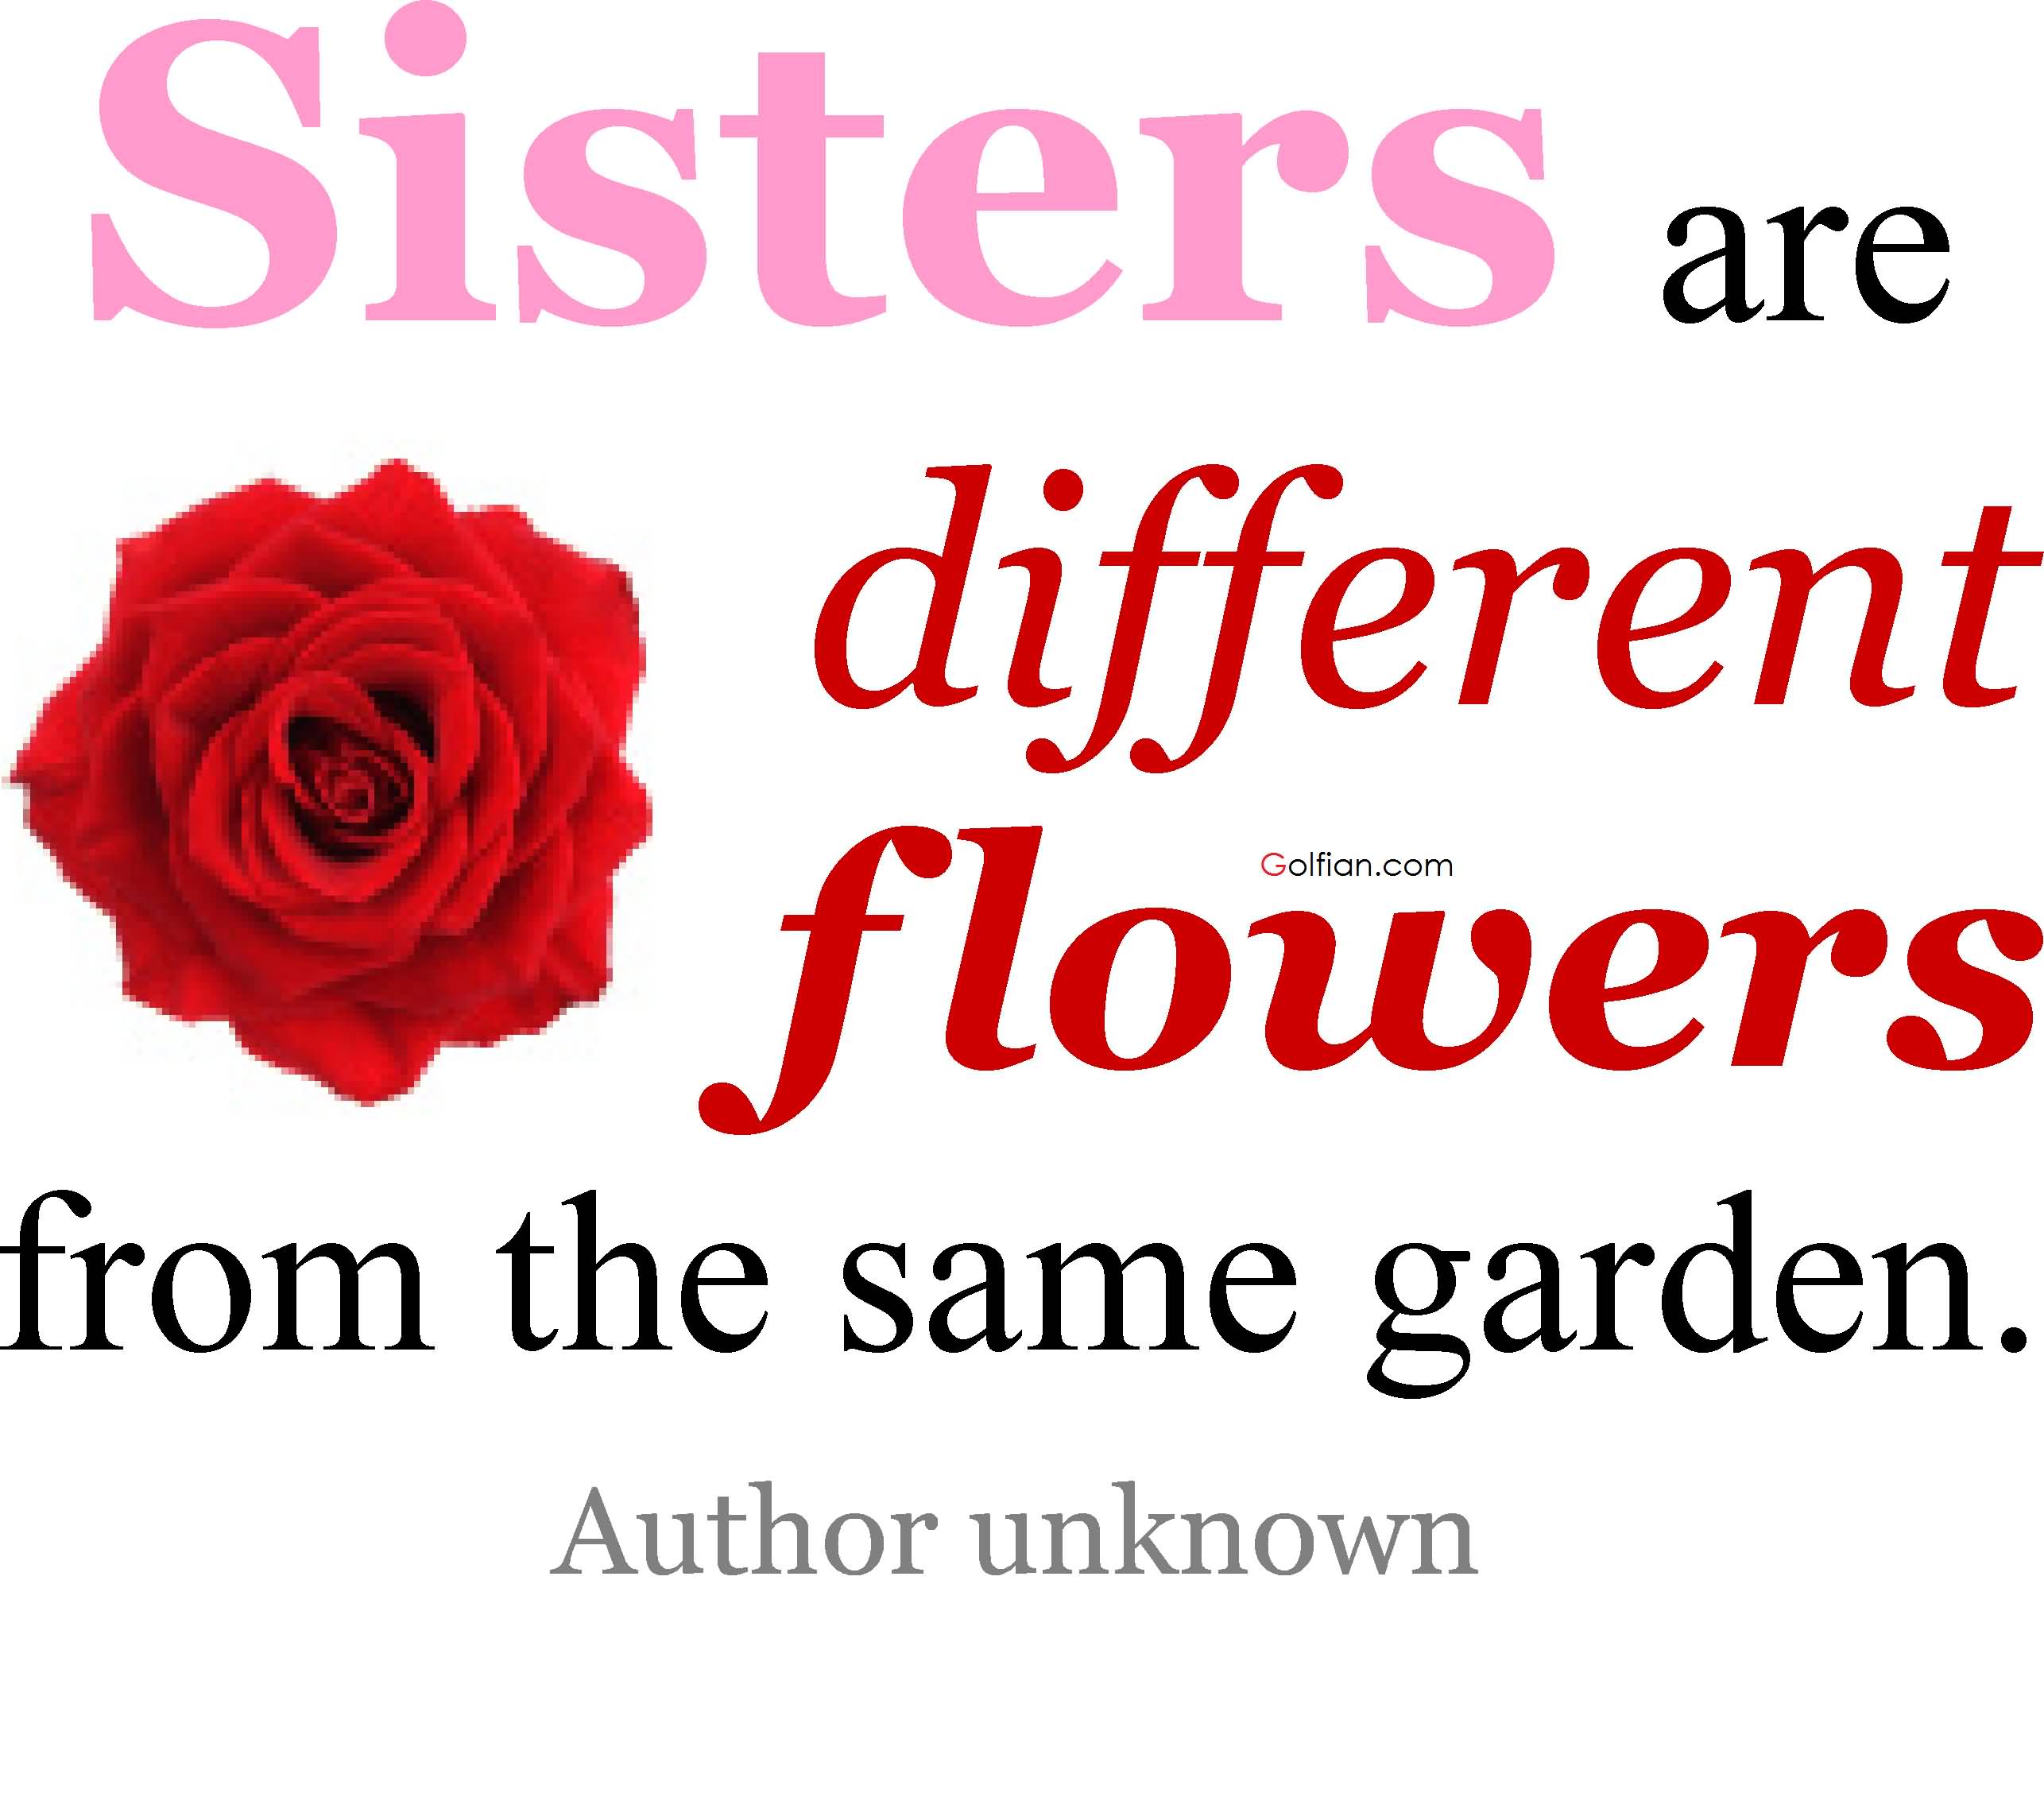 Best Quotes For Sister Love - 2572x2266 Wallpaper - teahub.io